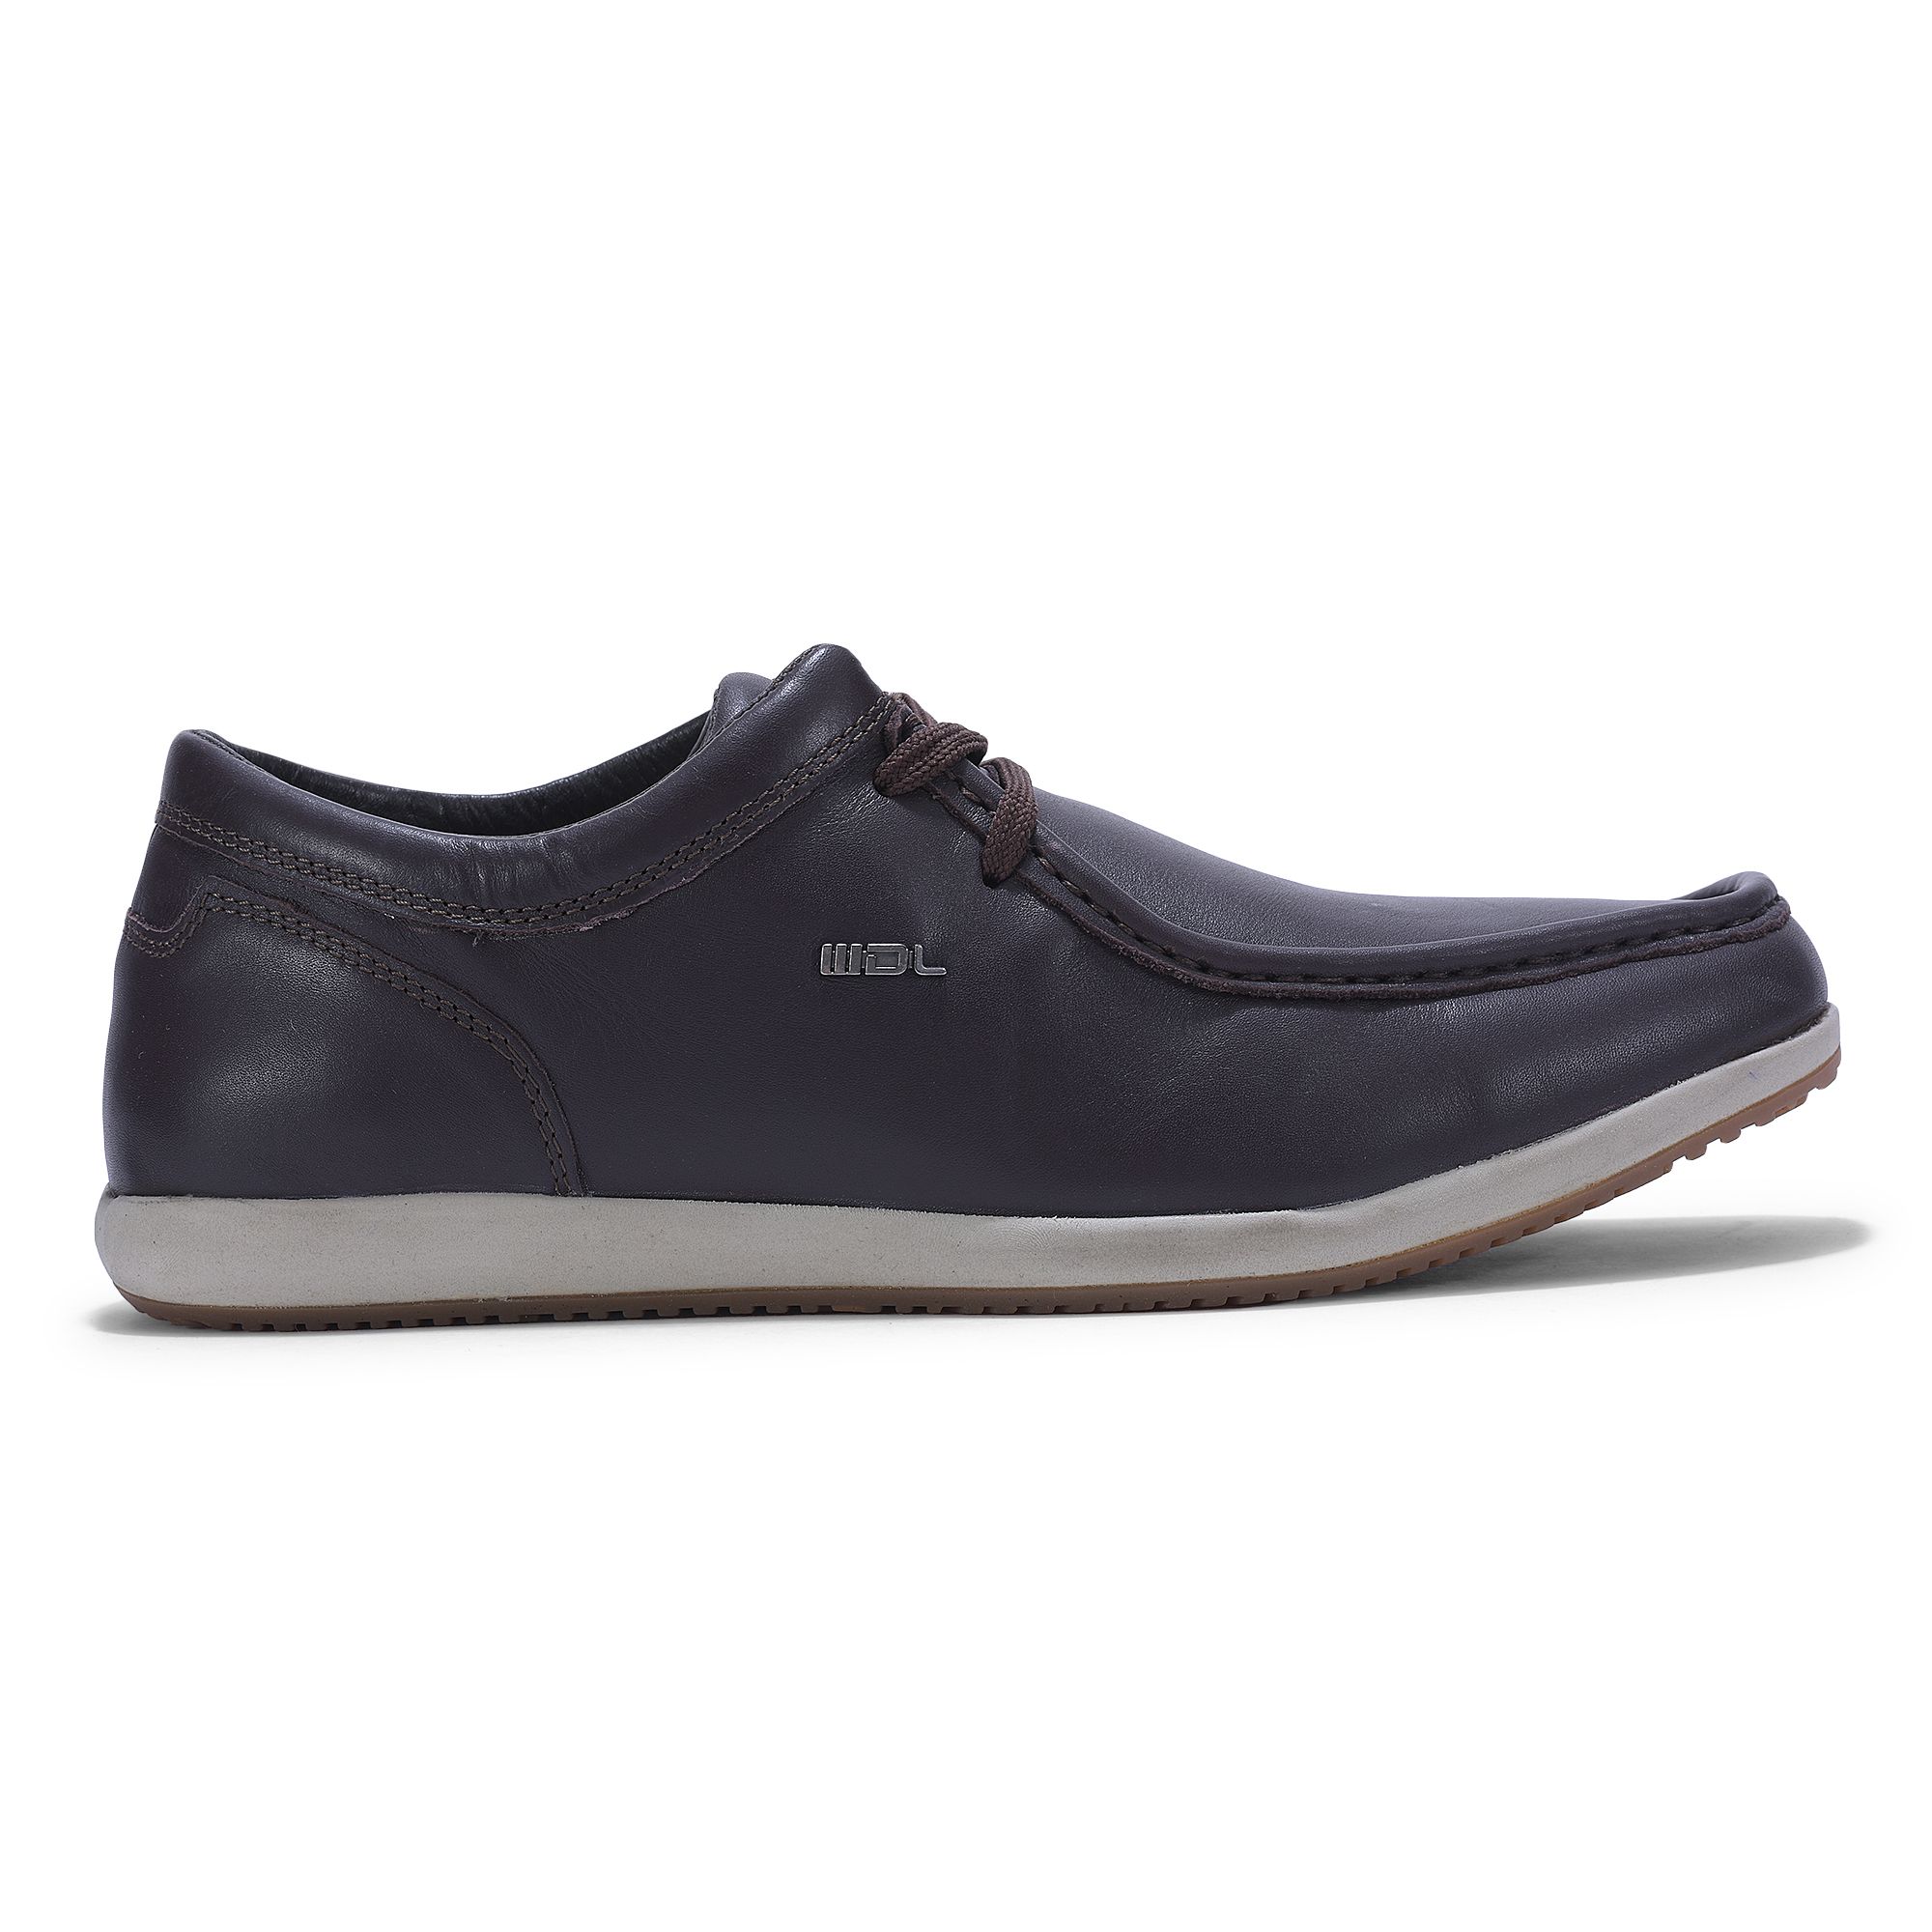 Woodland Men's Leather Casual Shoes | Leather shoes men, Woodland shoes,  Mens casual shoes